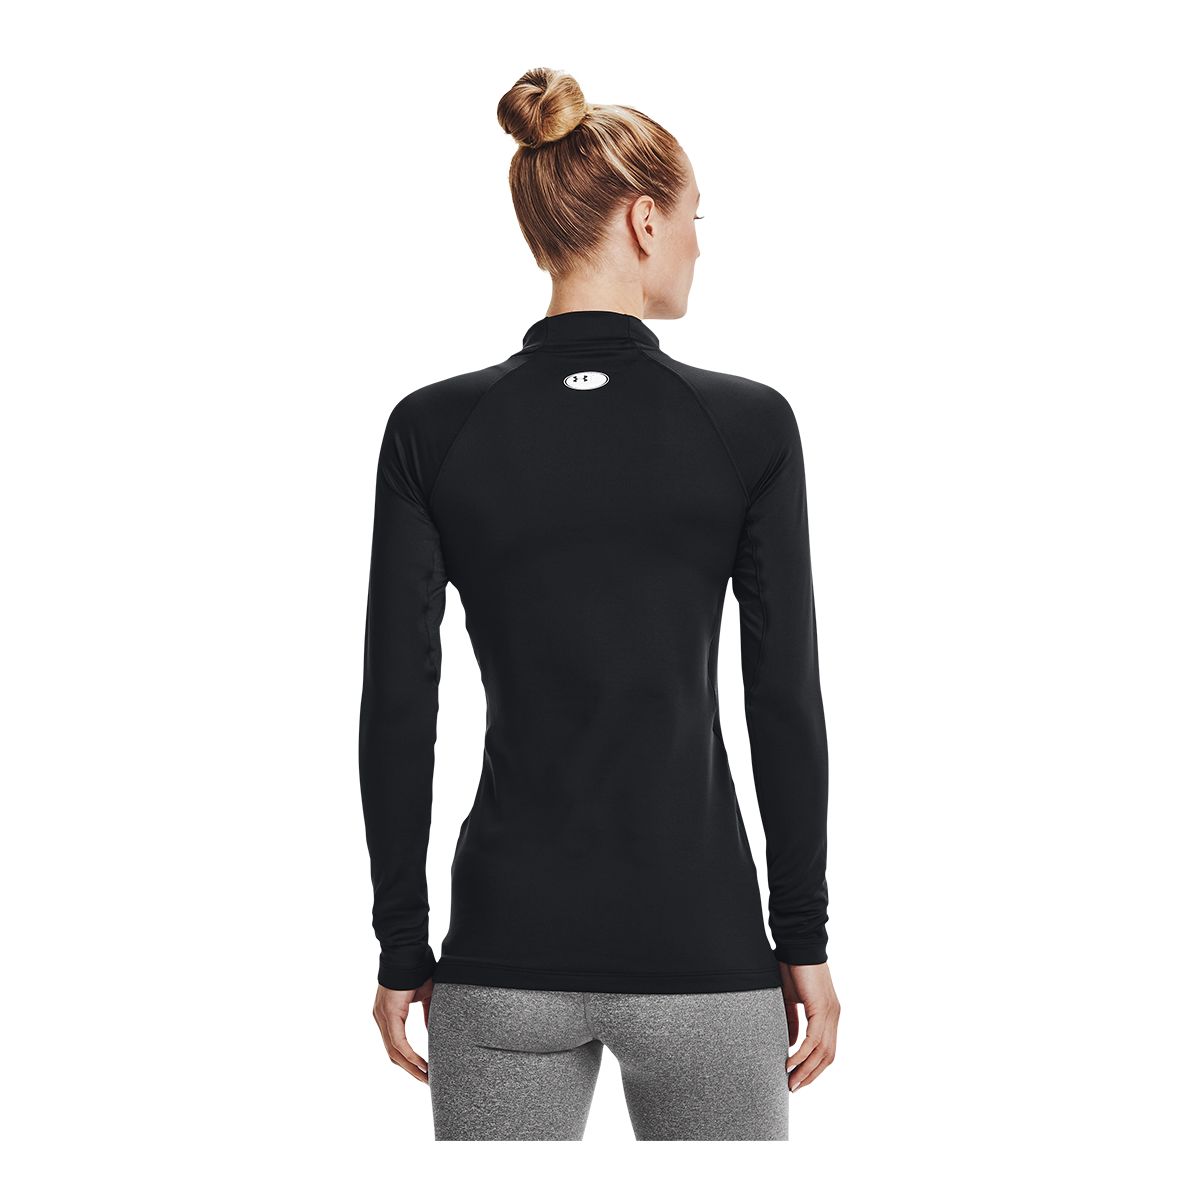 Under Armour ColdGear® Leggings - Girls – Sports Excellence